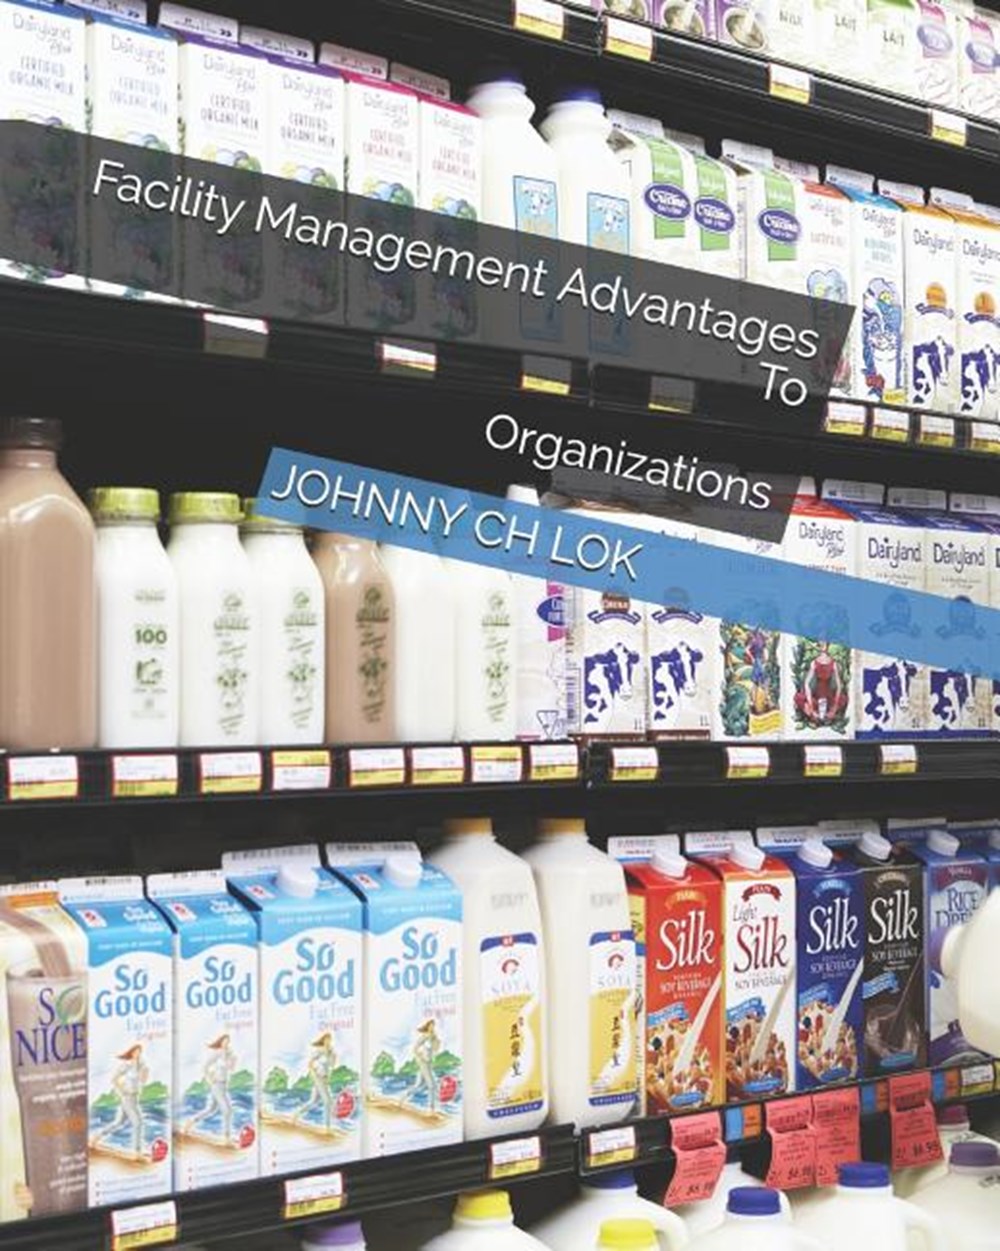 Facility Management Advantages: To Organizations